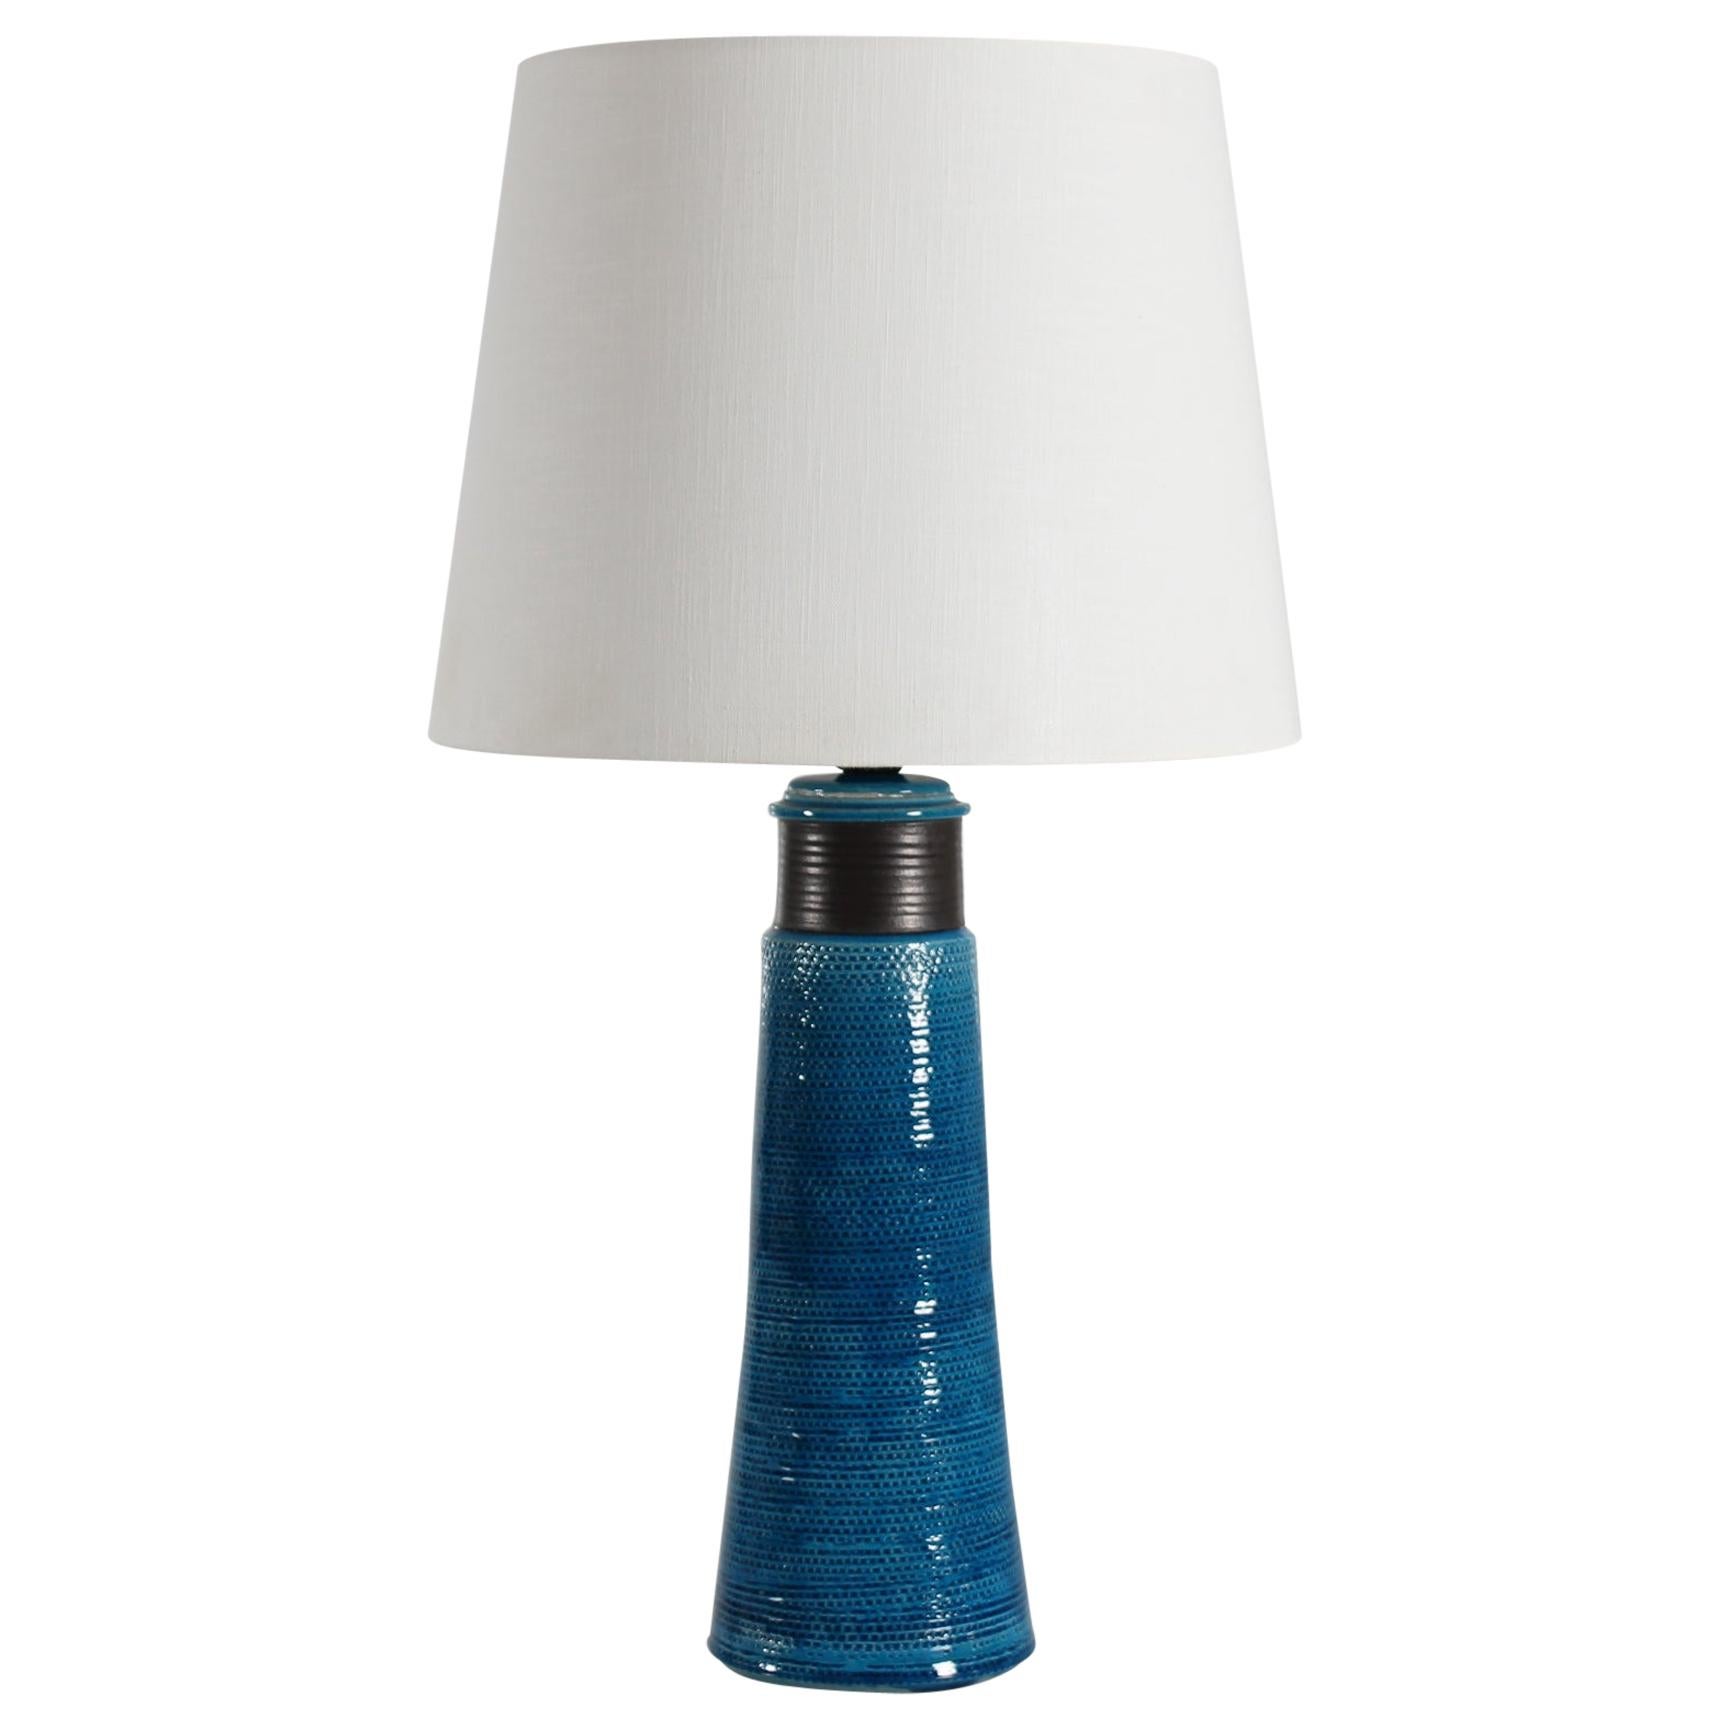 Huge Herman A Kähler Tablelamp with turquoise glaze made in Denmark Mid-century